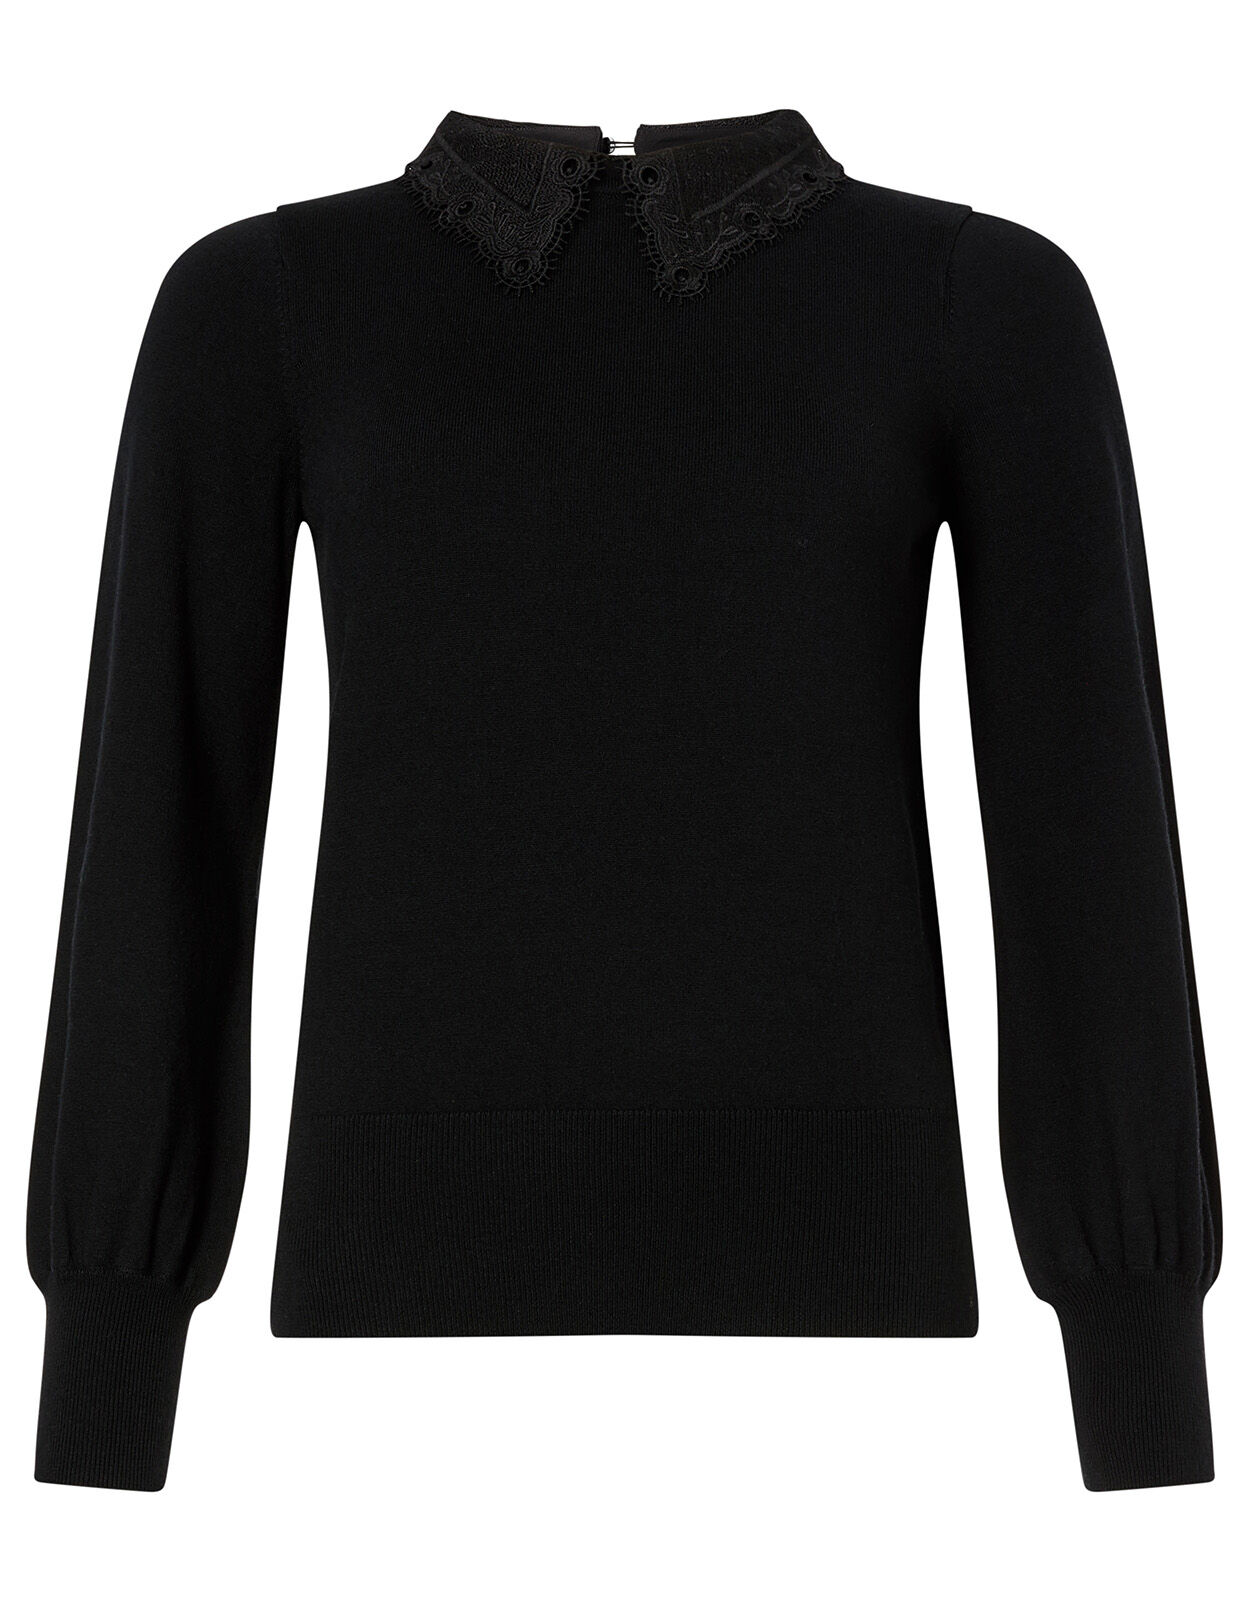 black jumper with white collar